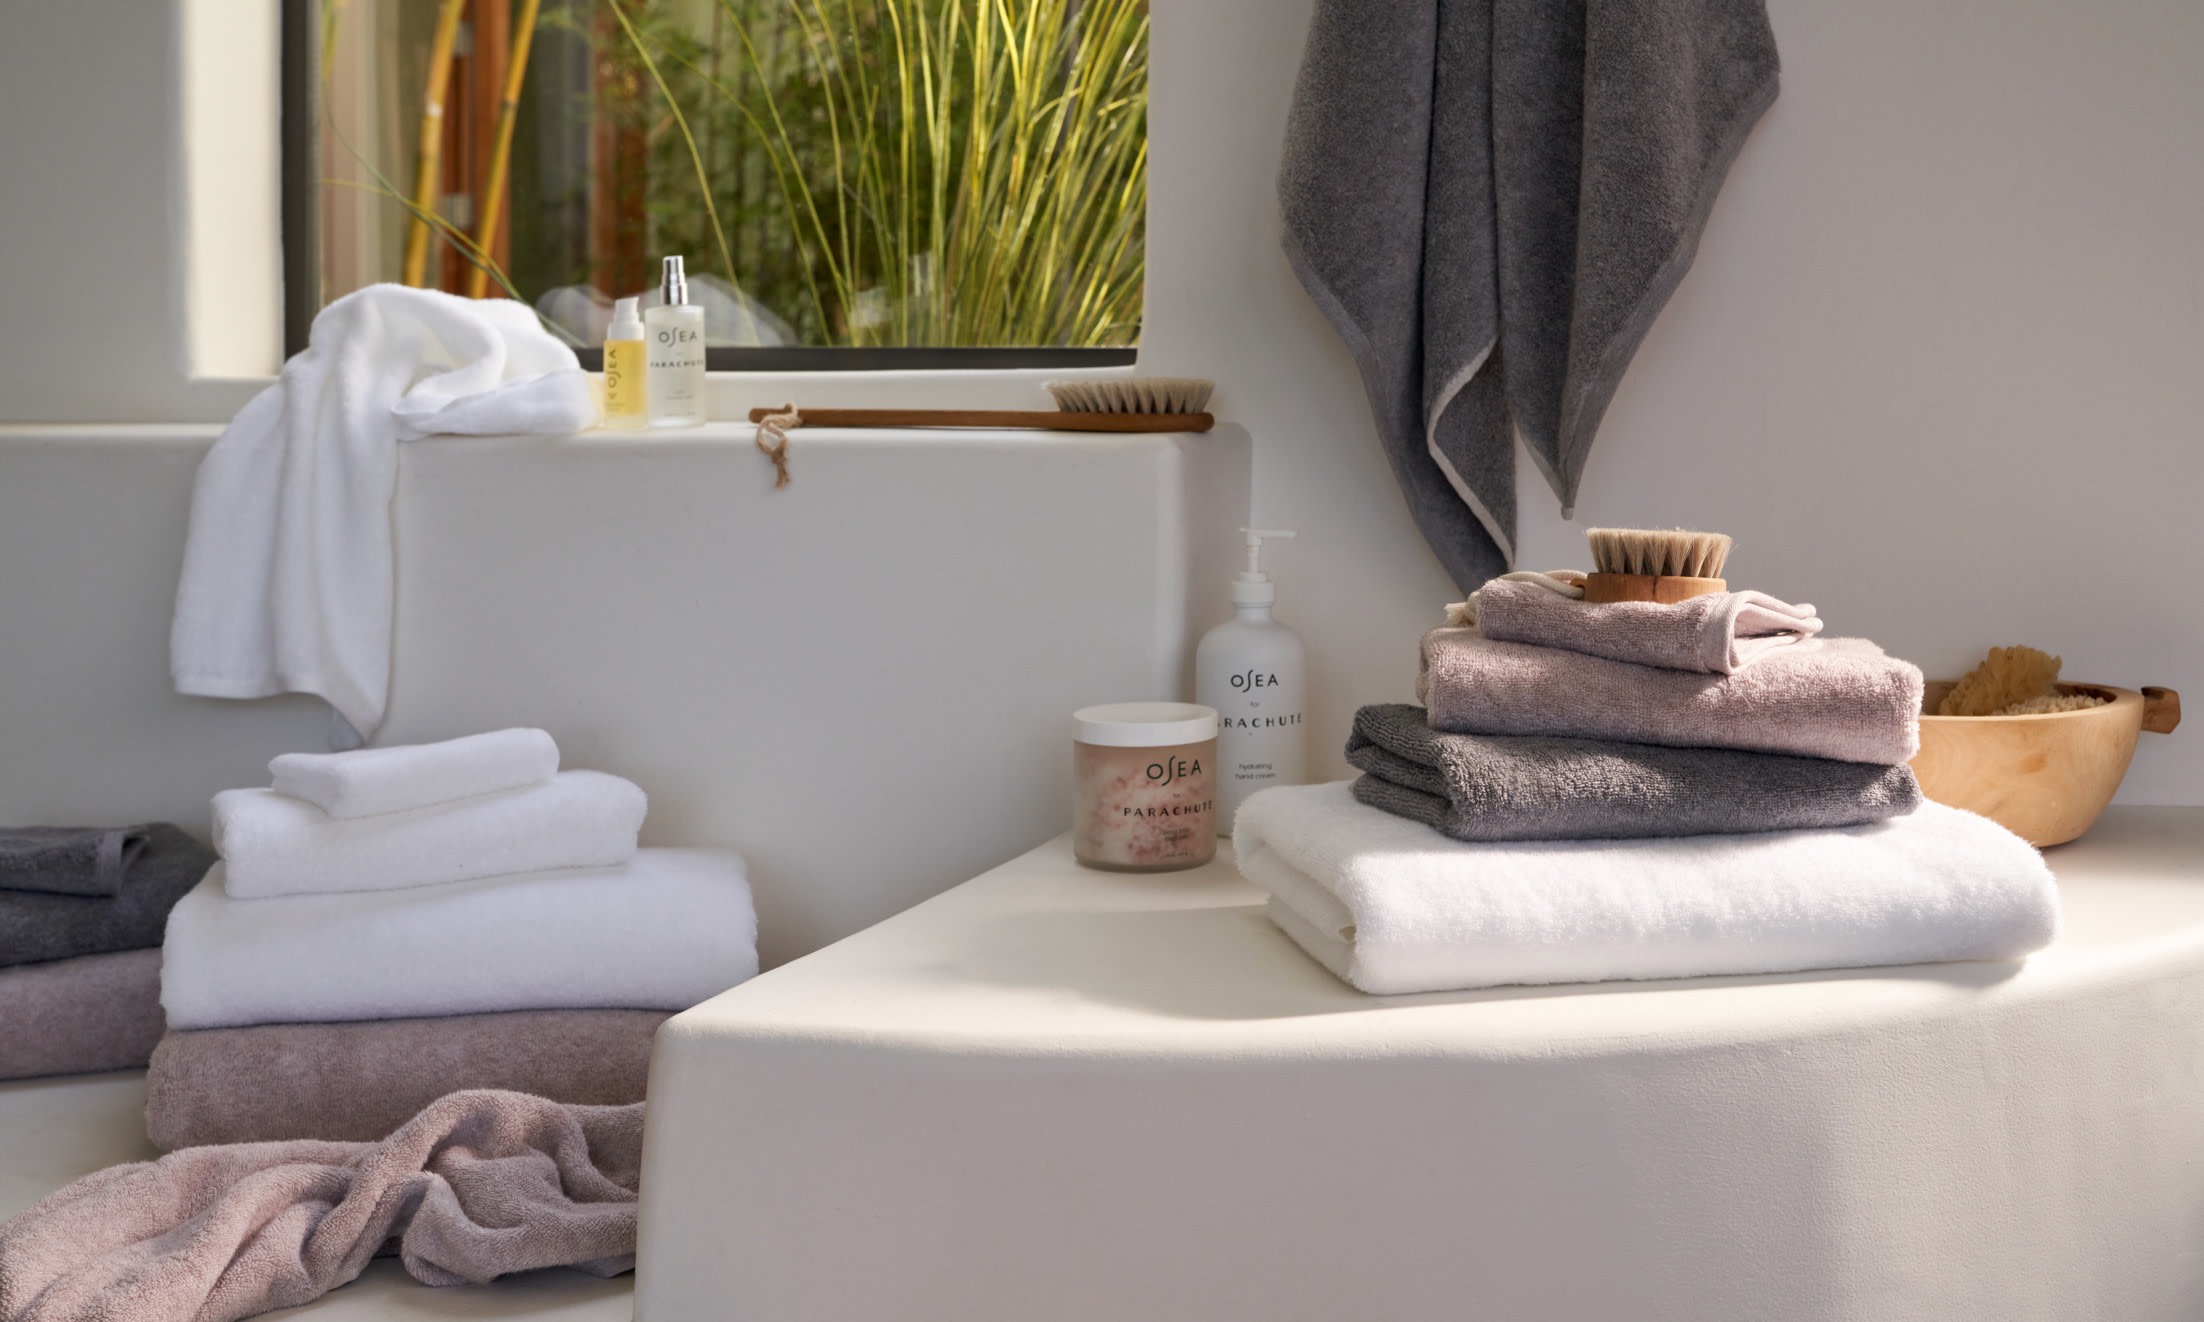 How to Choose the Best Towel Fabric